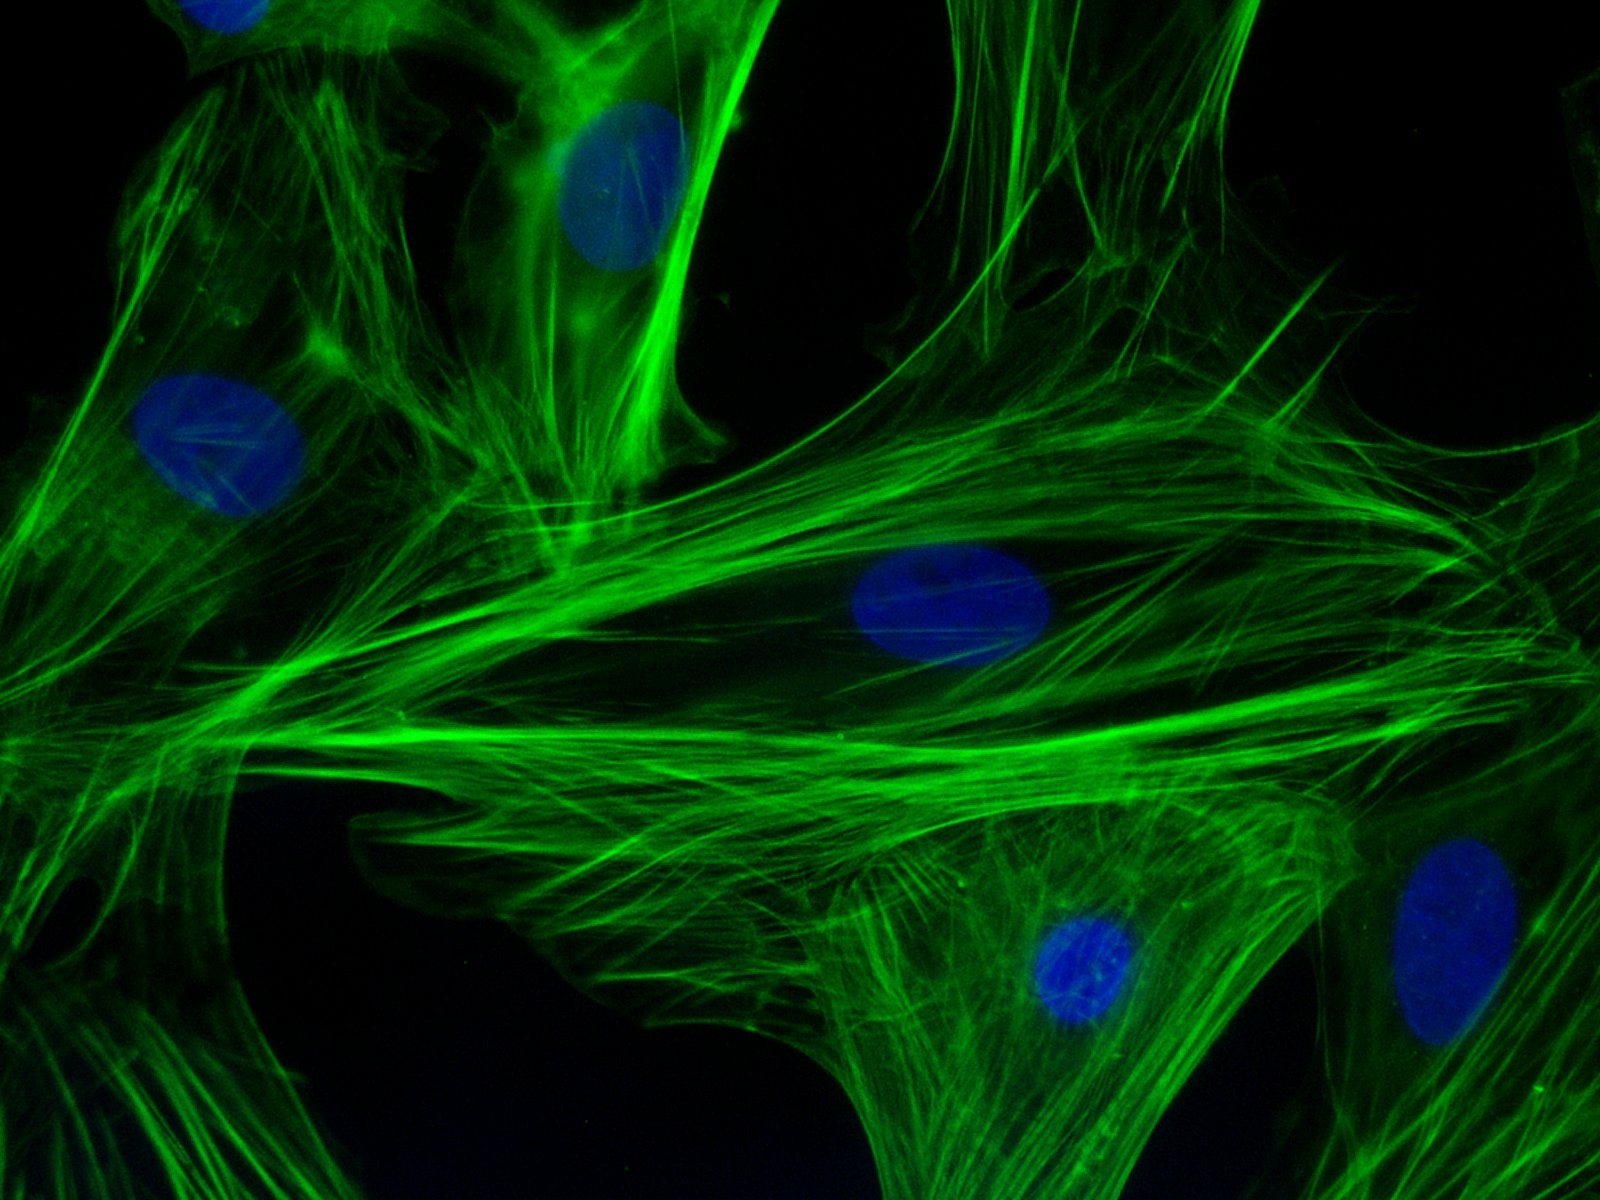 Microscope image of heart muscle cells. The cells are on a black background. The outlines of the cells are not visible. All that is visible are green lines and blue ovals. The blue ovals are the nuclei of the cells. The green lines are structural protein filaments inside the cells. Each cell contains many of these filaments, running roughly parallel to each other. The shape of each cell can be inferred from the way the structural protein filaments are distributed.